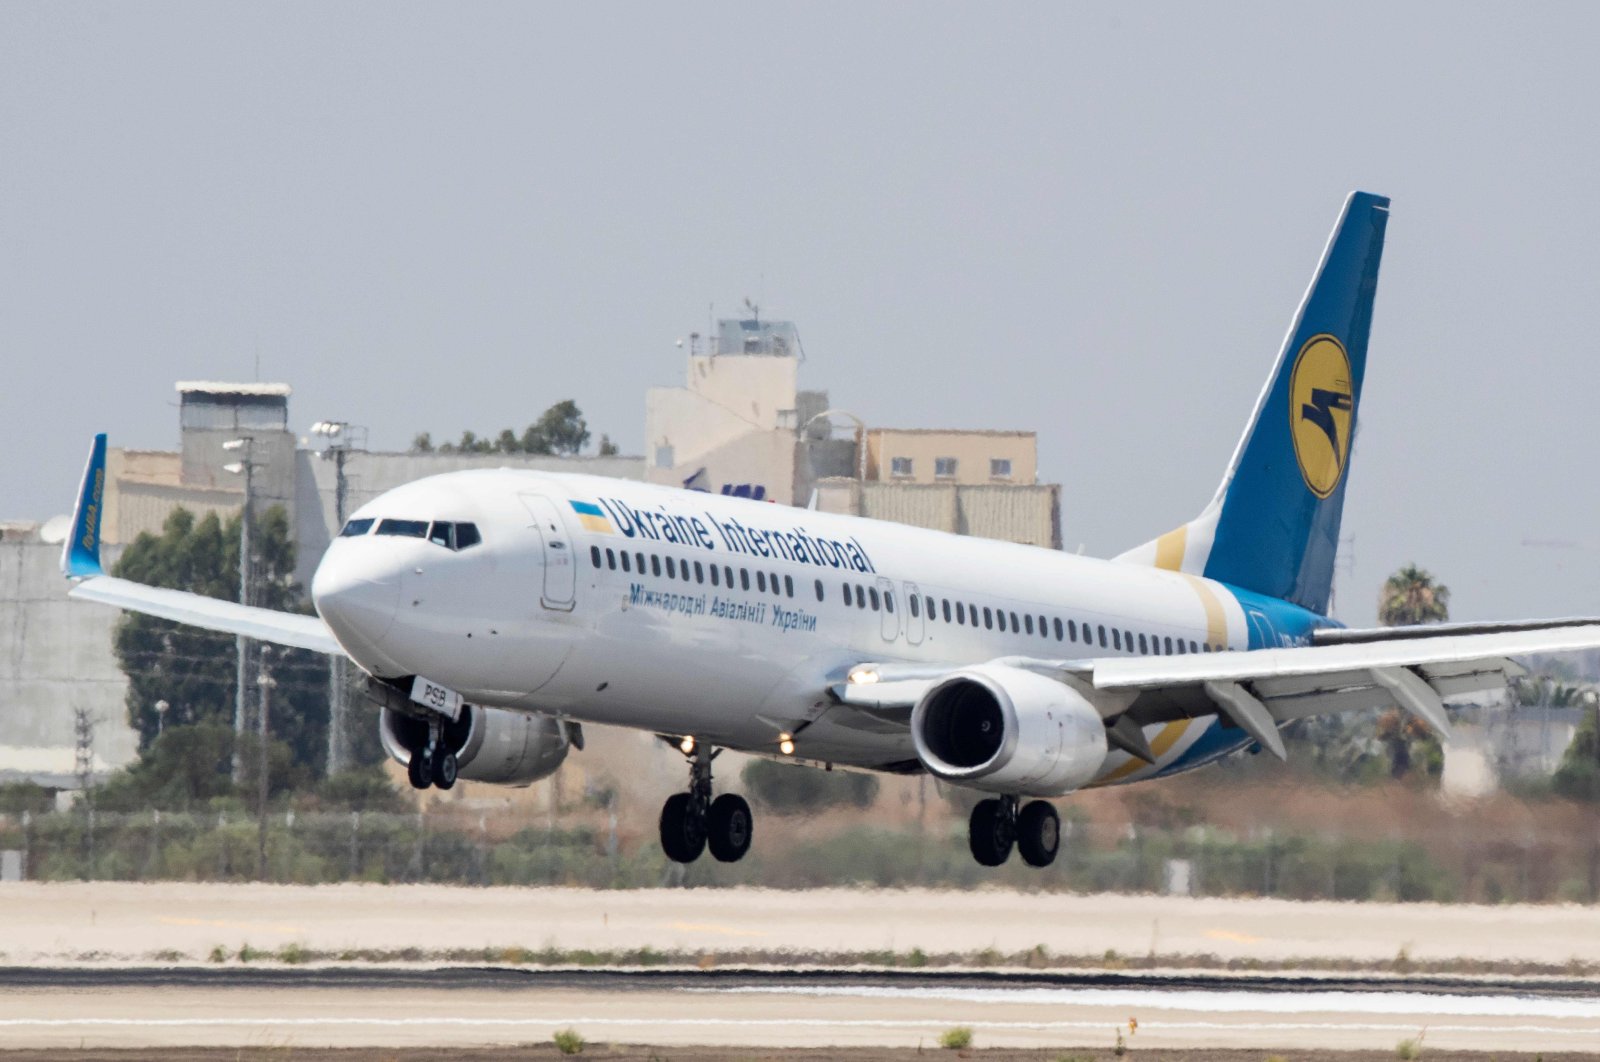 A Boeing 737-3E7 from Ukraine International Airlines lands at Israel's Ben Gurion International airport on the outskirts of Tel Aviv, July 4, 2017. (AFP Photo)